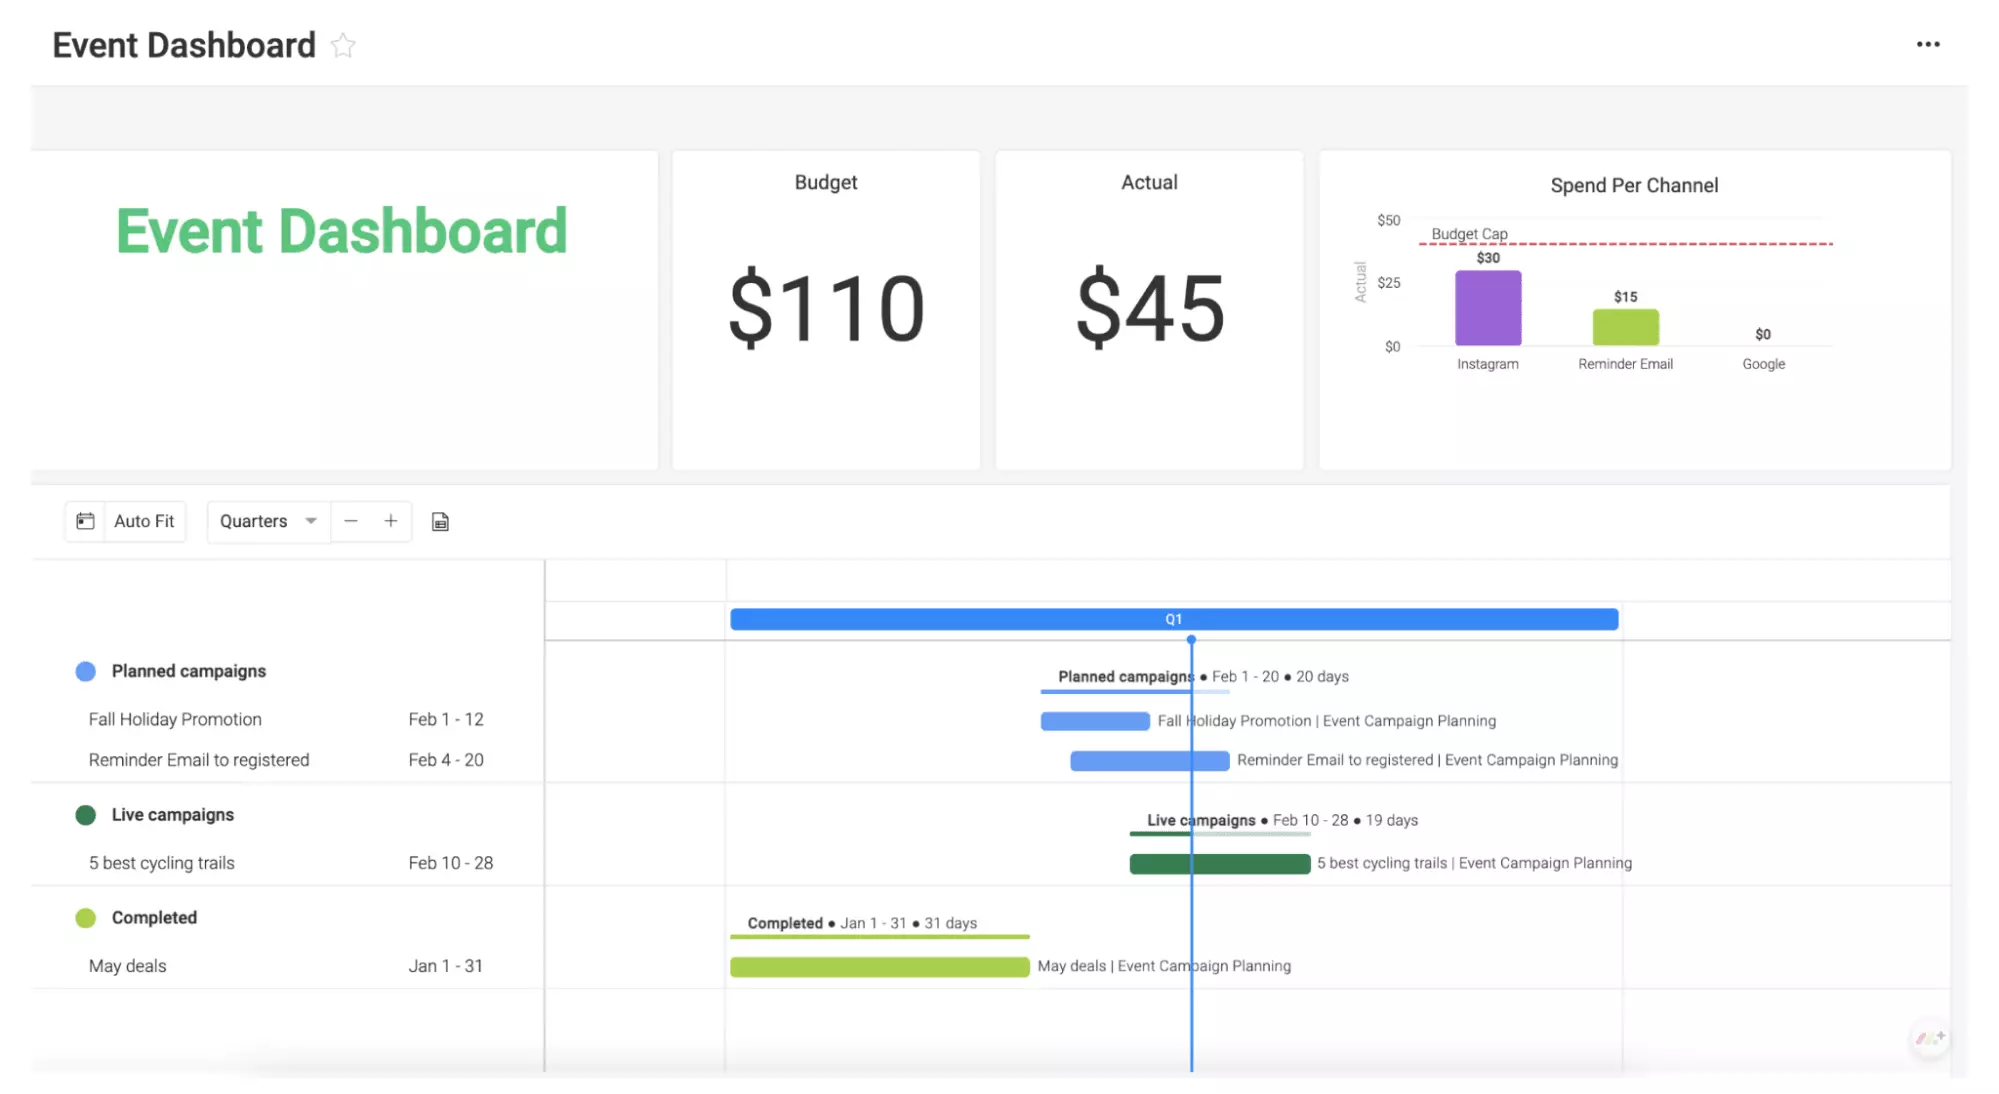 monday.com provides users with event dashboards